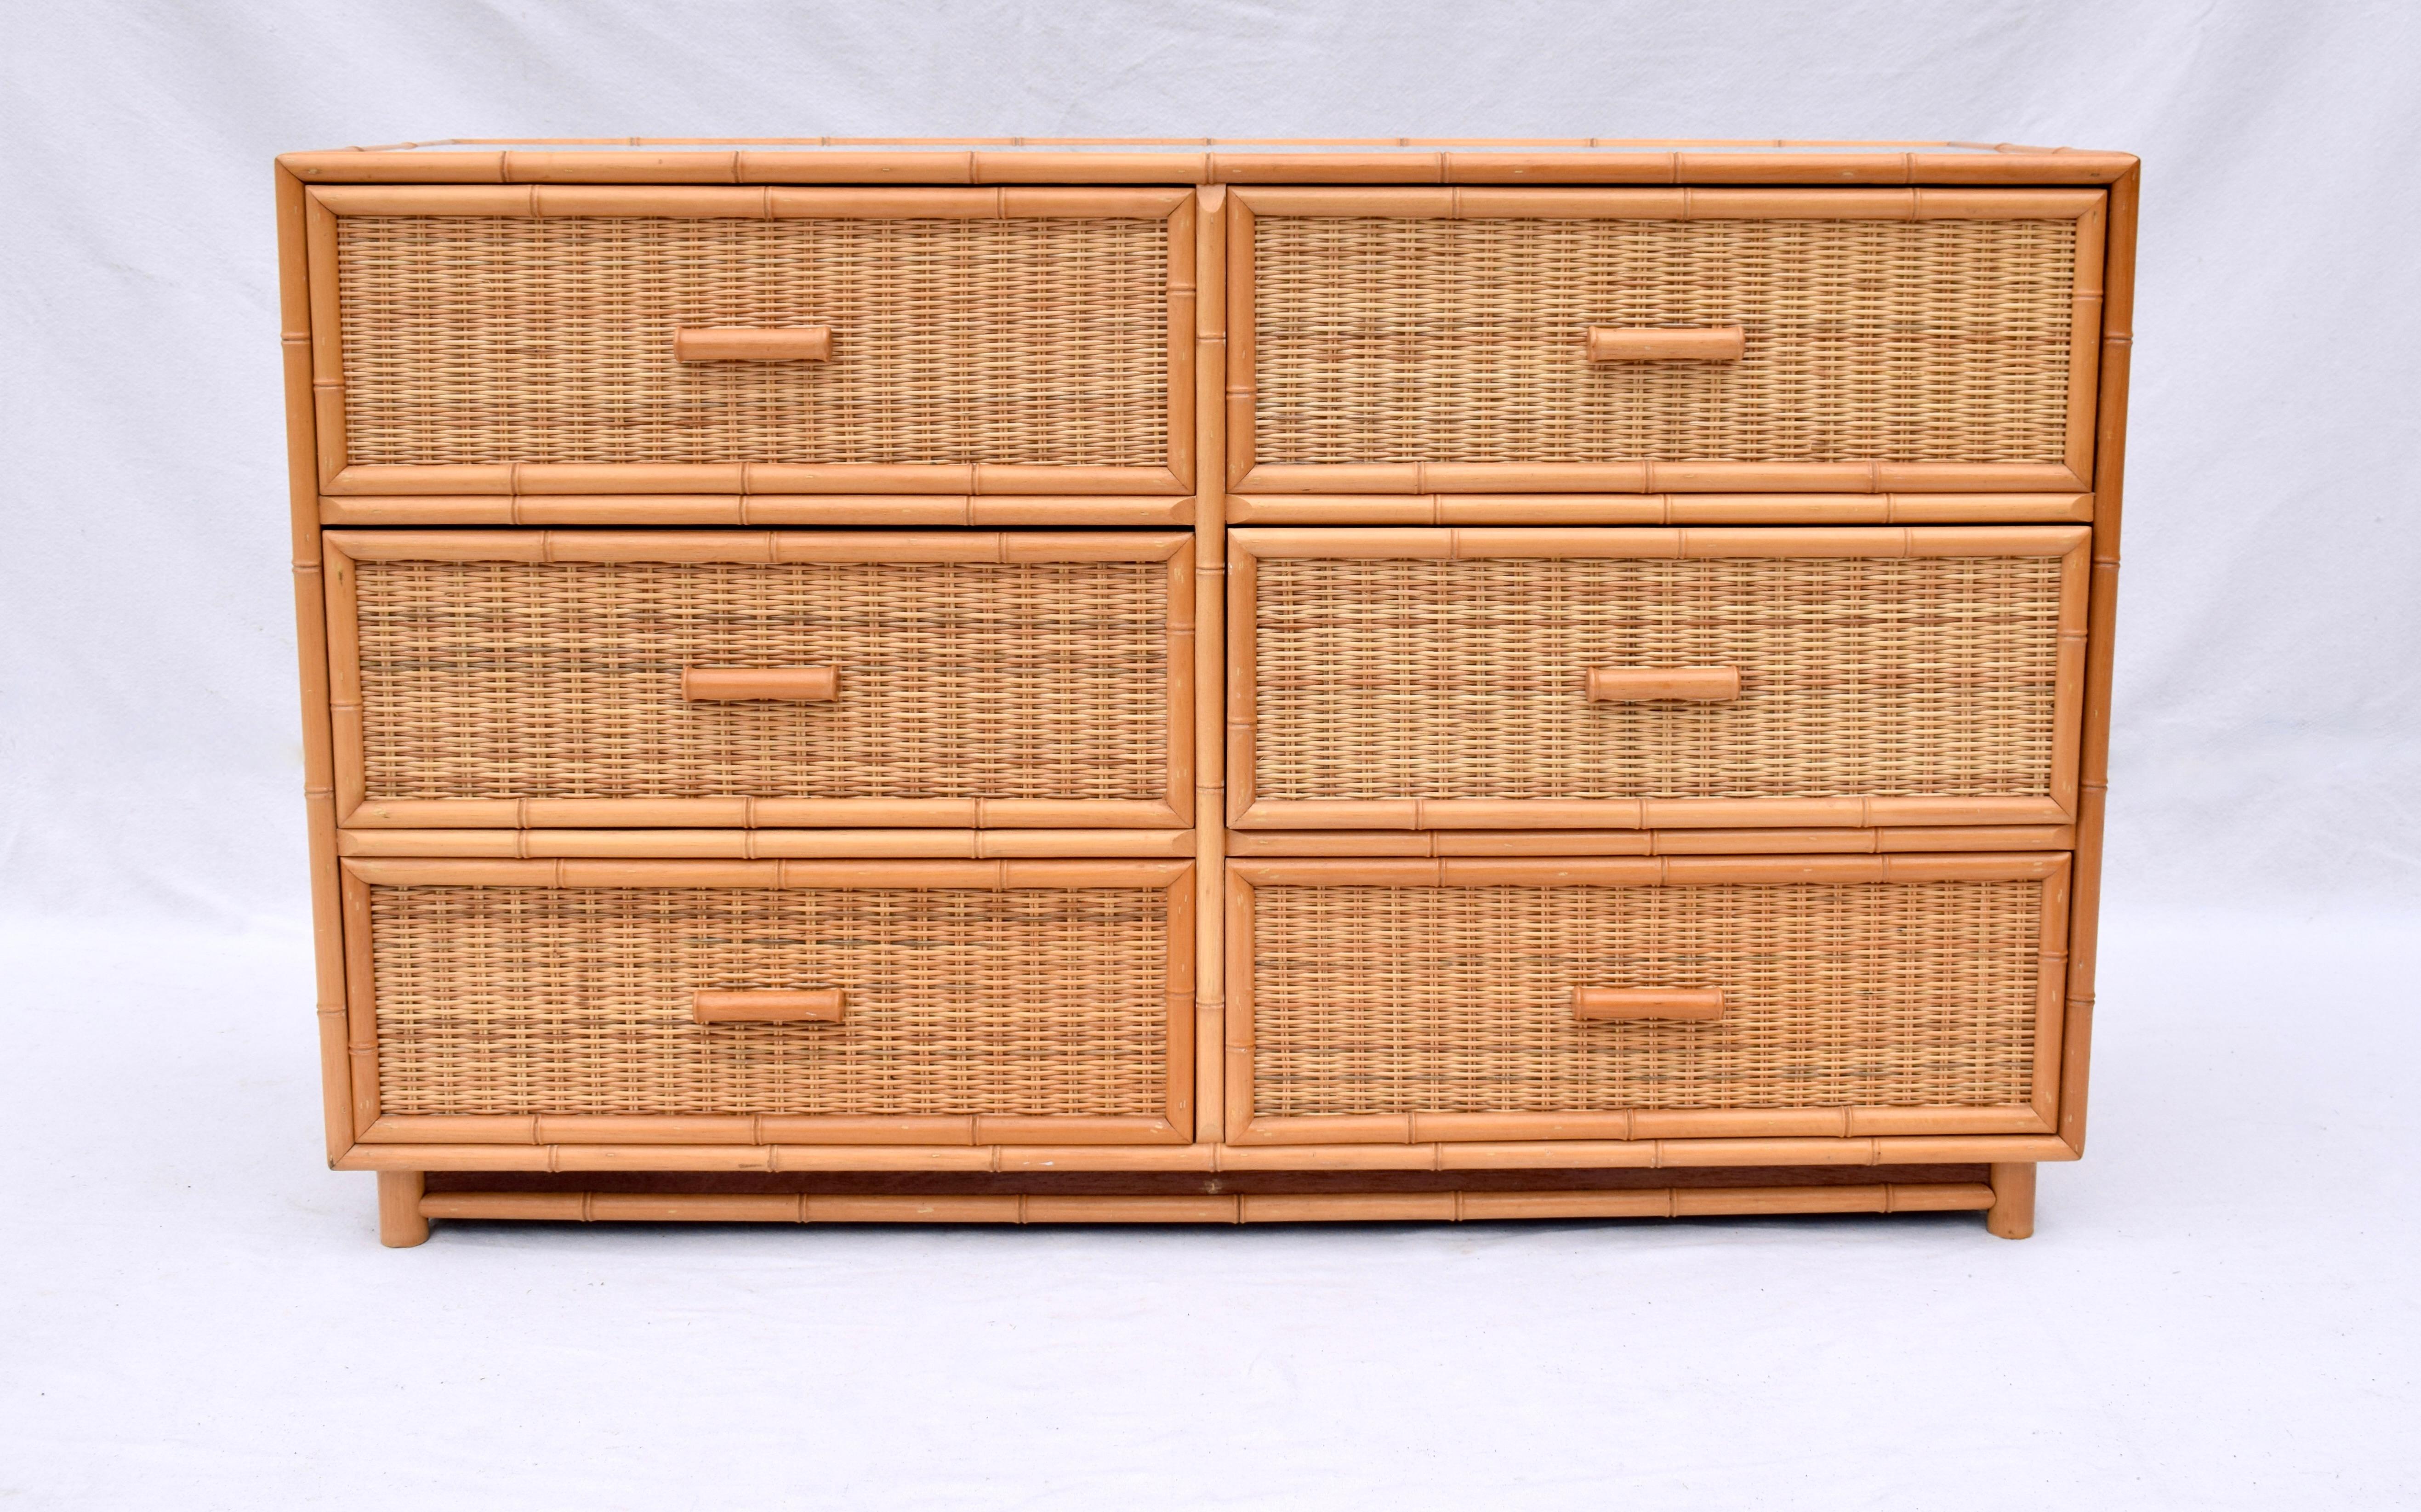 A vintage Coastal six drawer dresser of woven rattan panels, carved bamboo trim & custom glass top. A single matching nightstand can be viewed in our separate listing:  